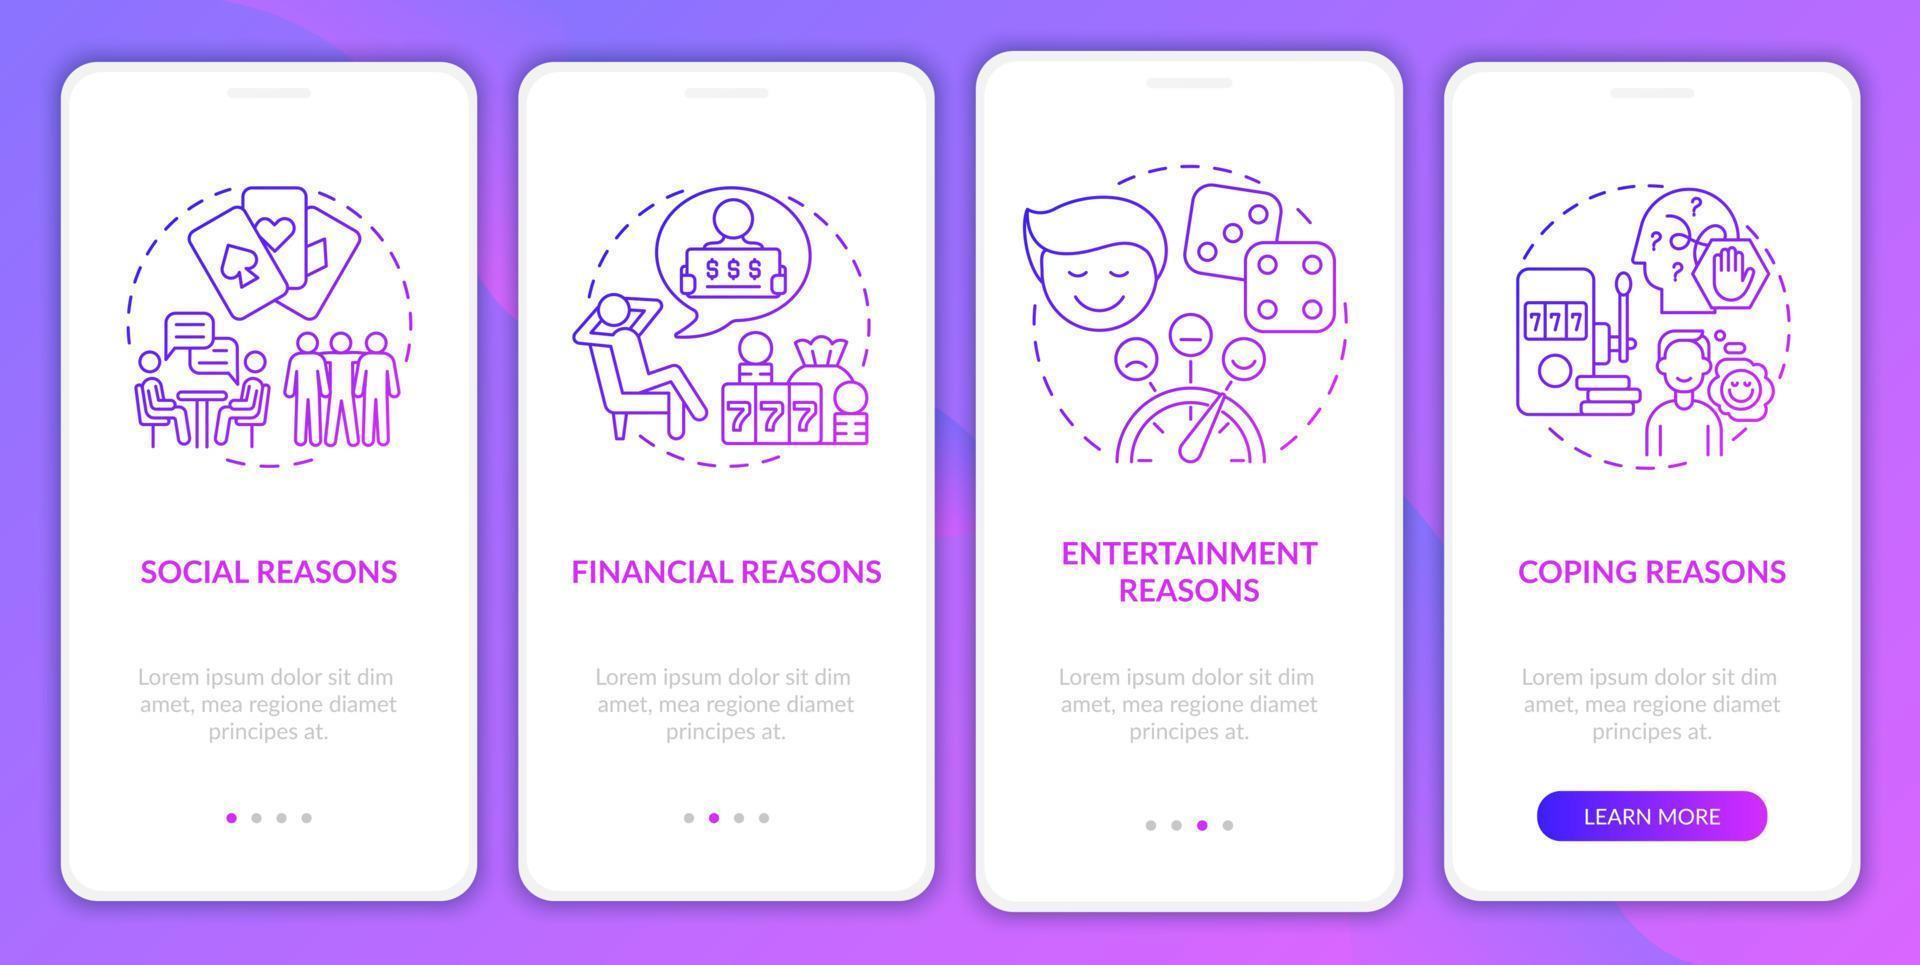 Reasons to gamble purple gradient onboarding mobile app screen. Walkthrough 4 steps graphic instructions pages with linear concepts. UI, UX, GUI template. vector